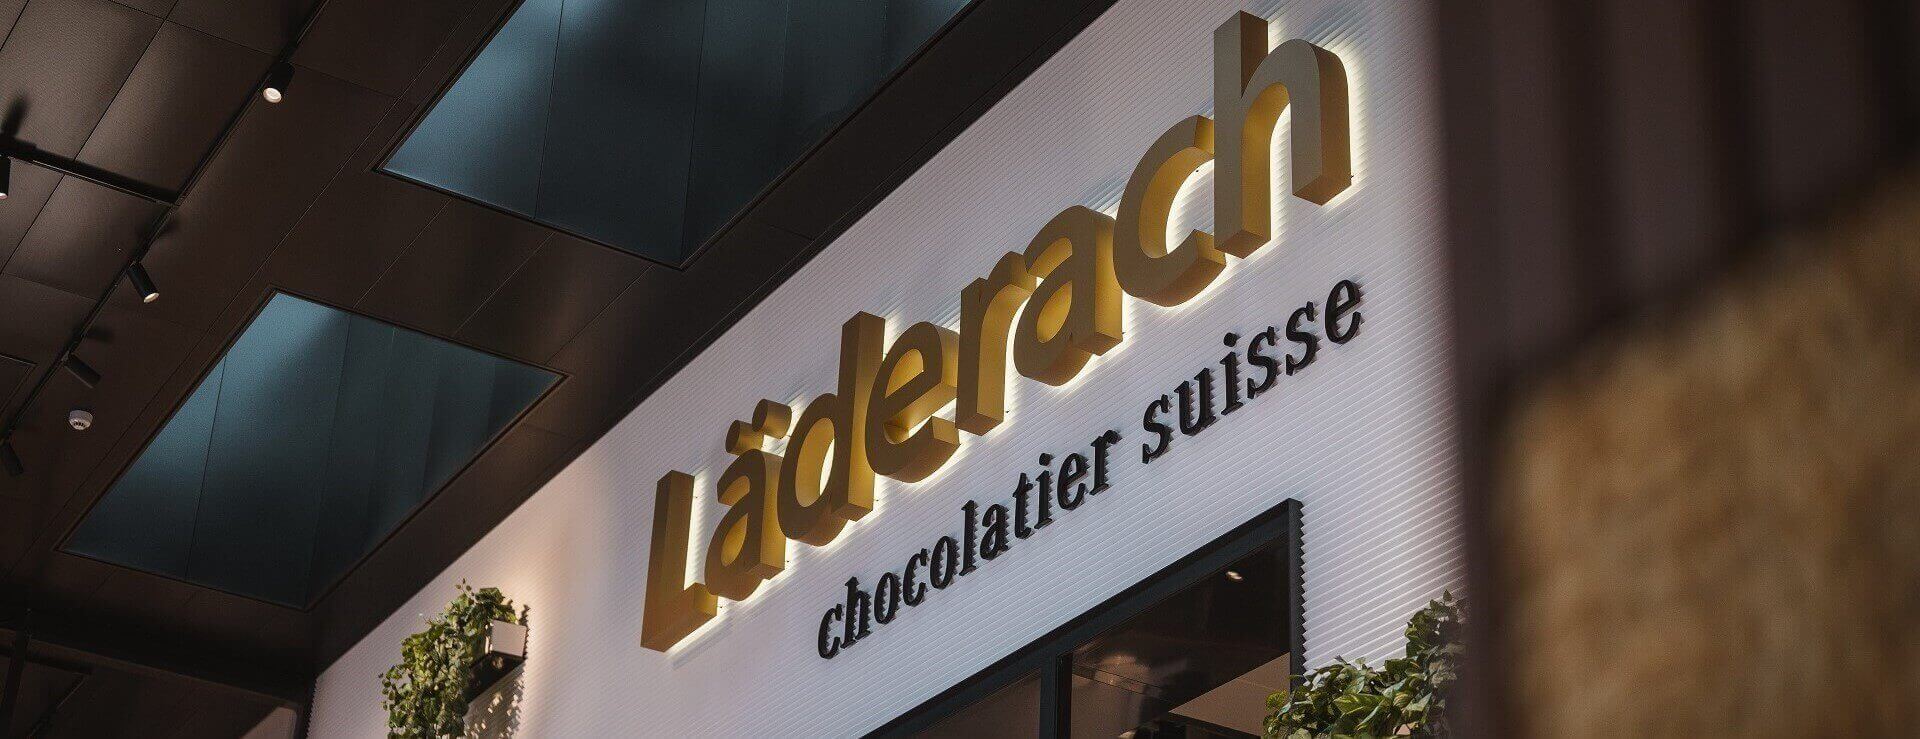 Läderach chocolatier suisse to assume the leases for 34 stores in the United States